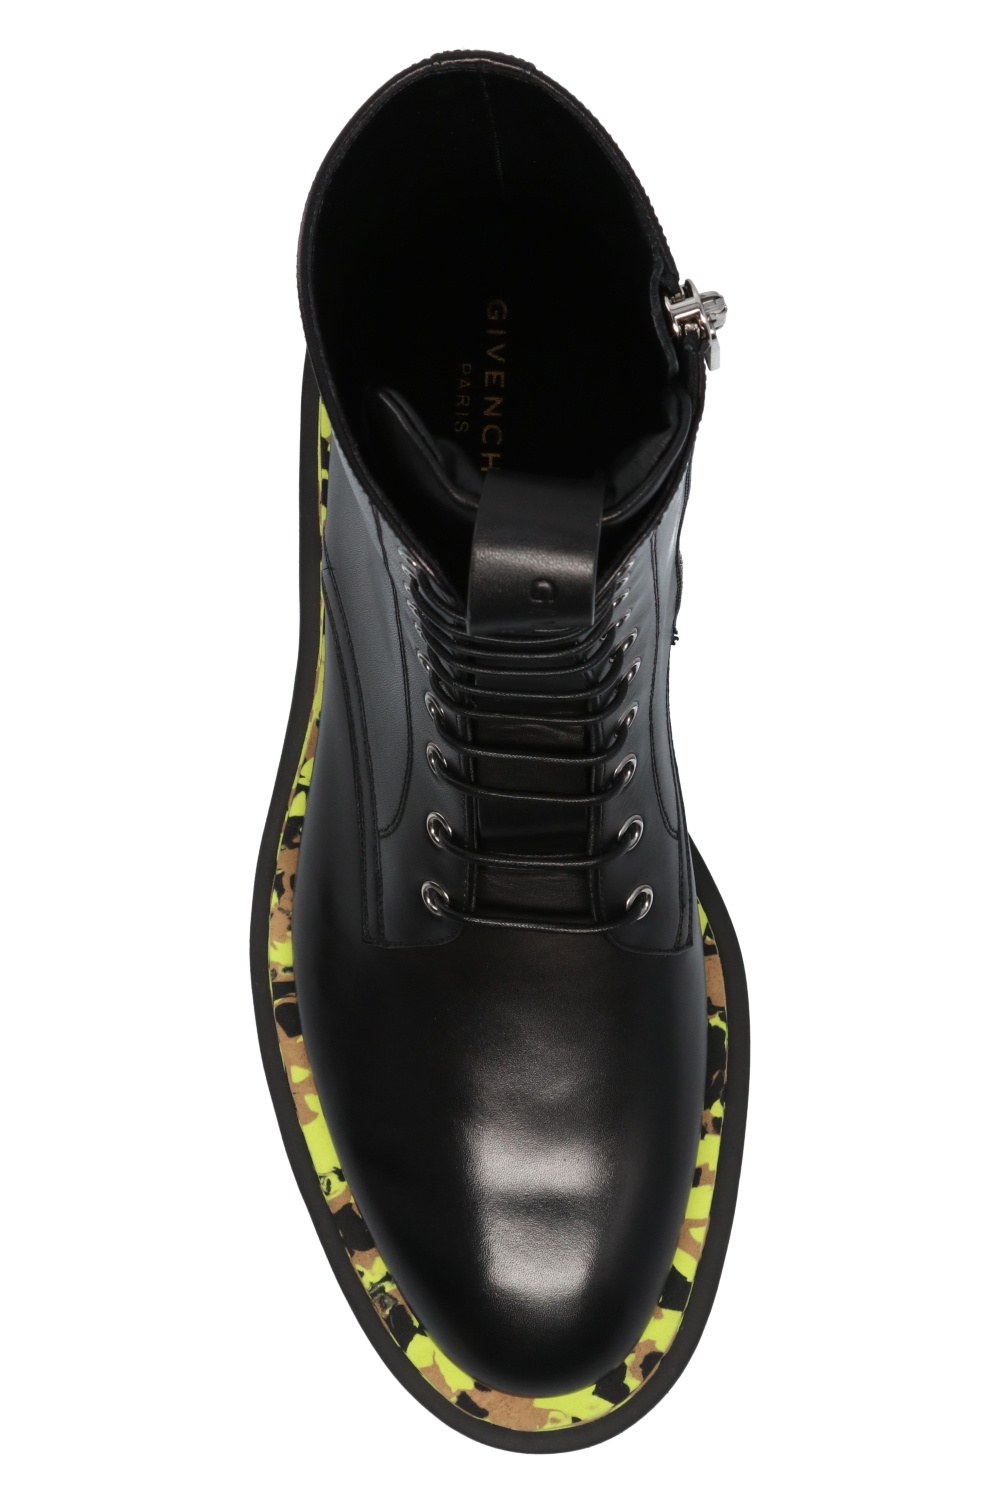 Givenchy Leather combat boots